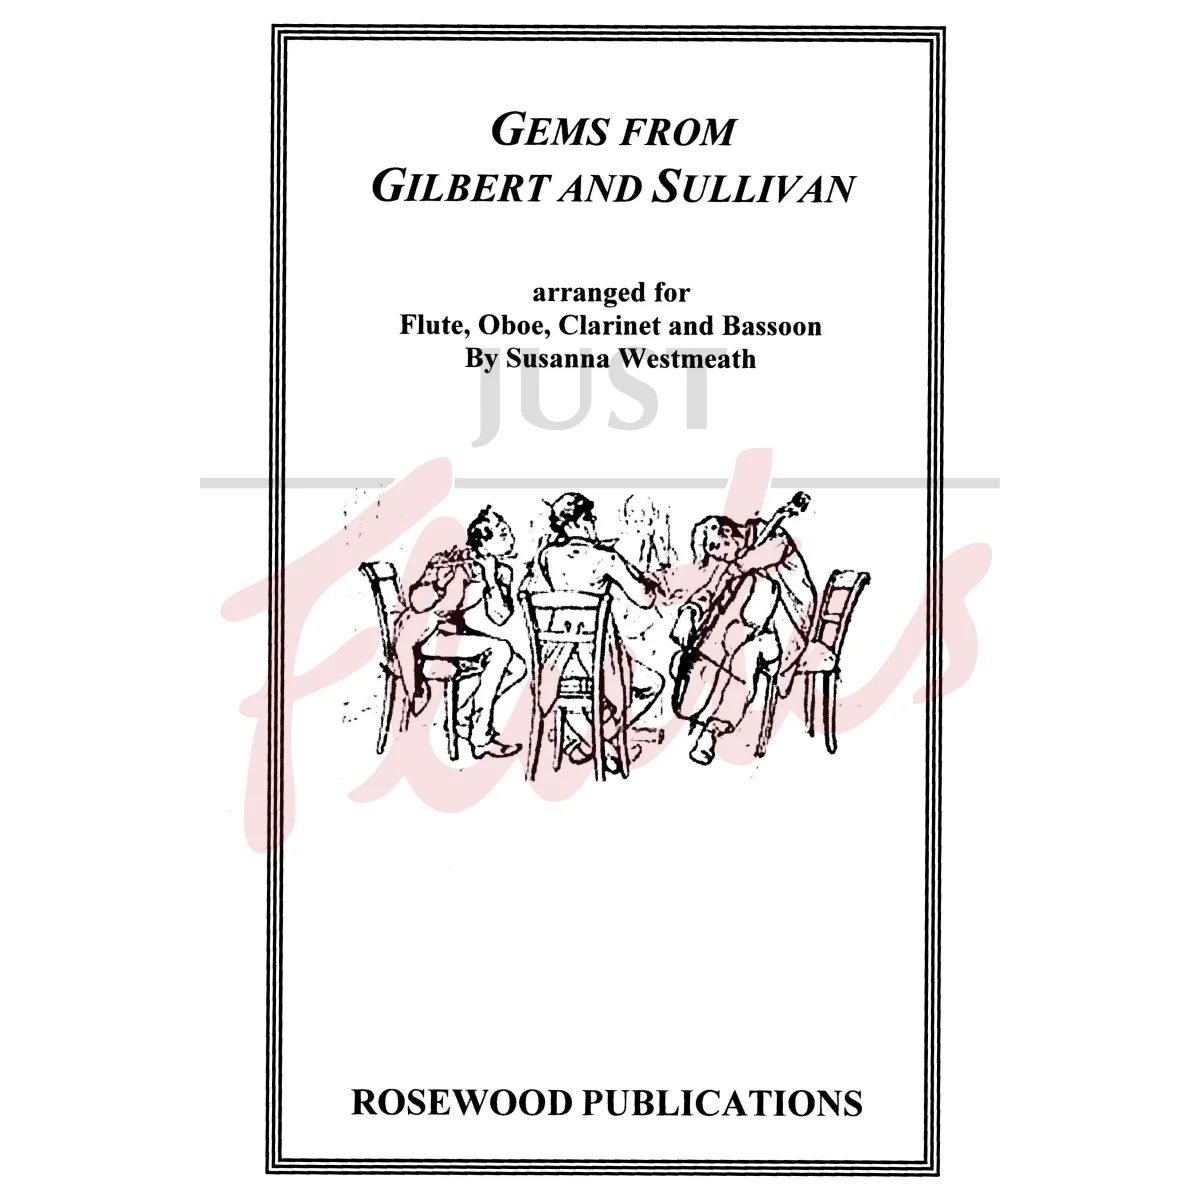 Gems from Gilbert and Sullivan for Flute, Oboe, Clarinet and Bassoon